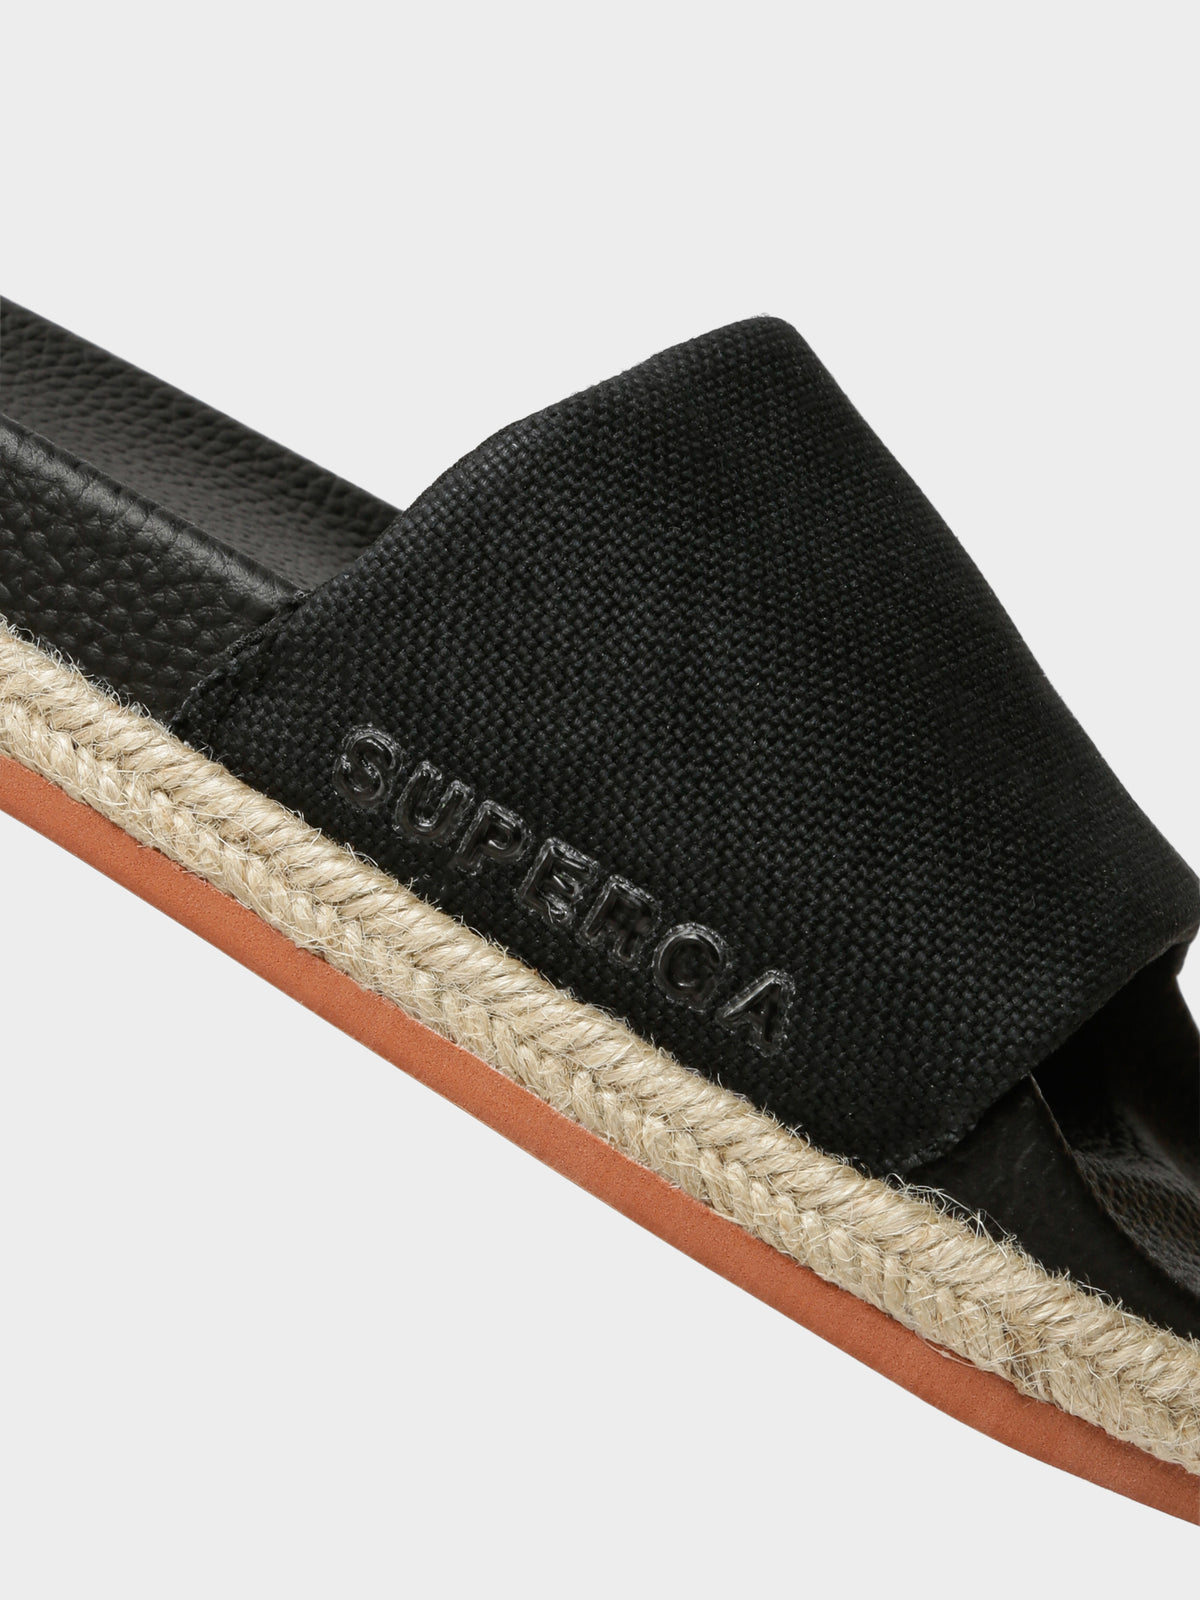 Womens 1908 Organic Canvas Rope Slides in Black